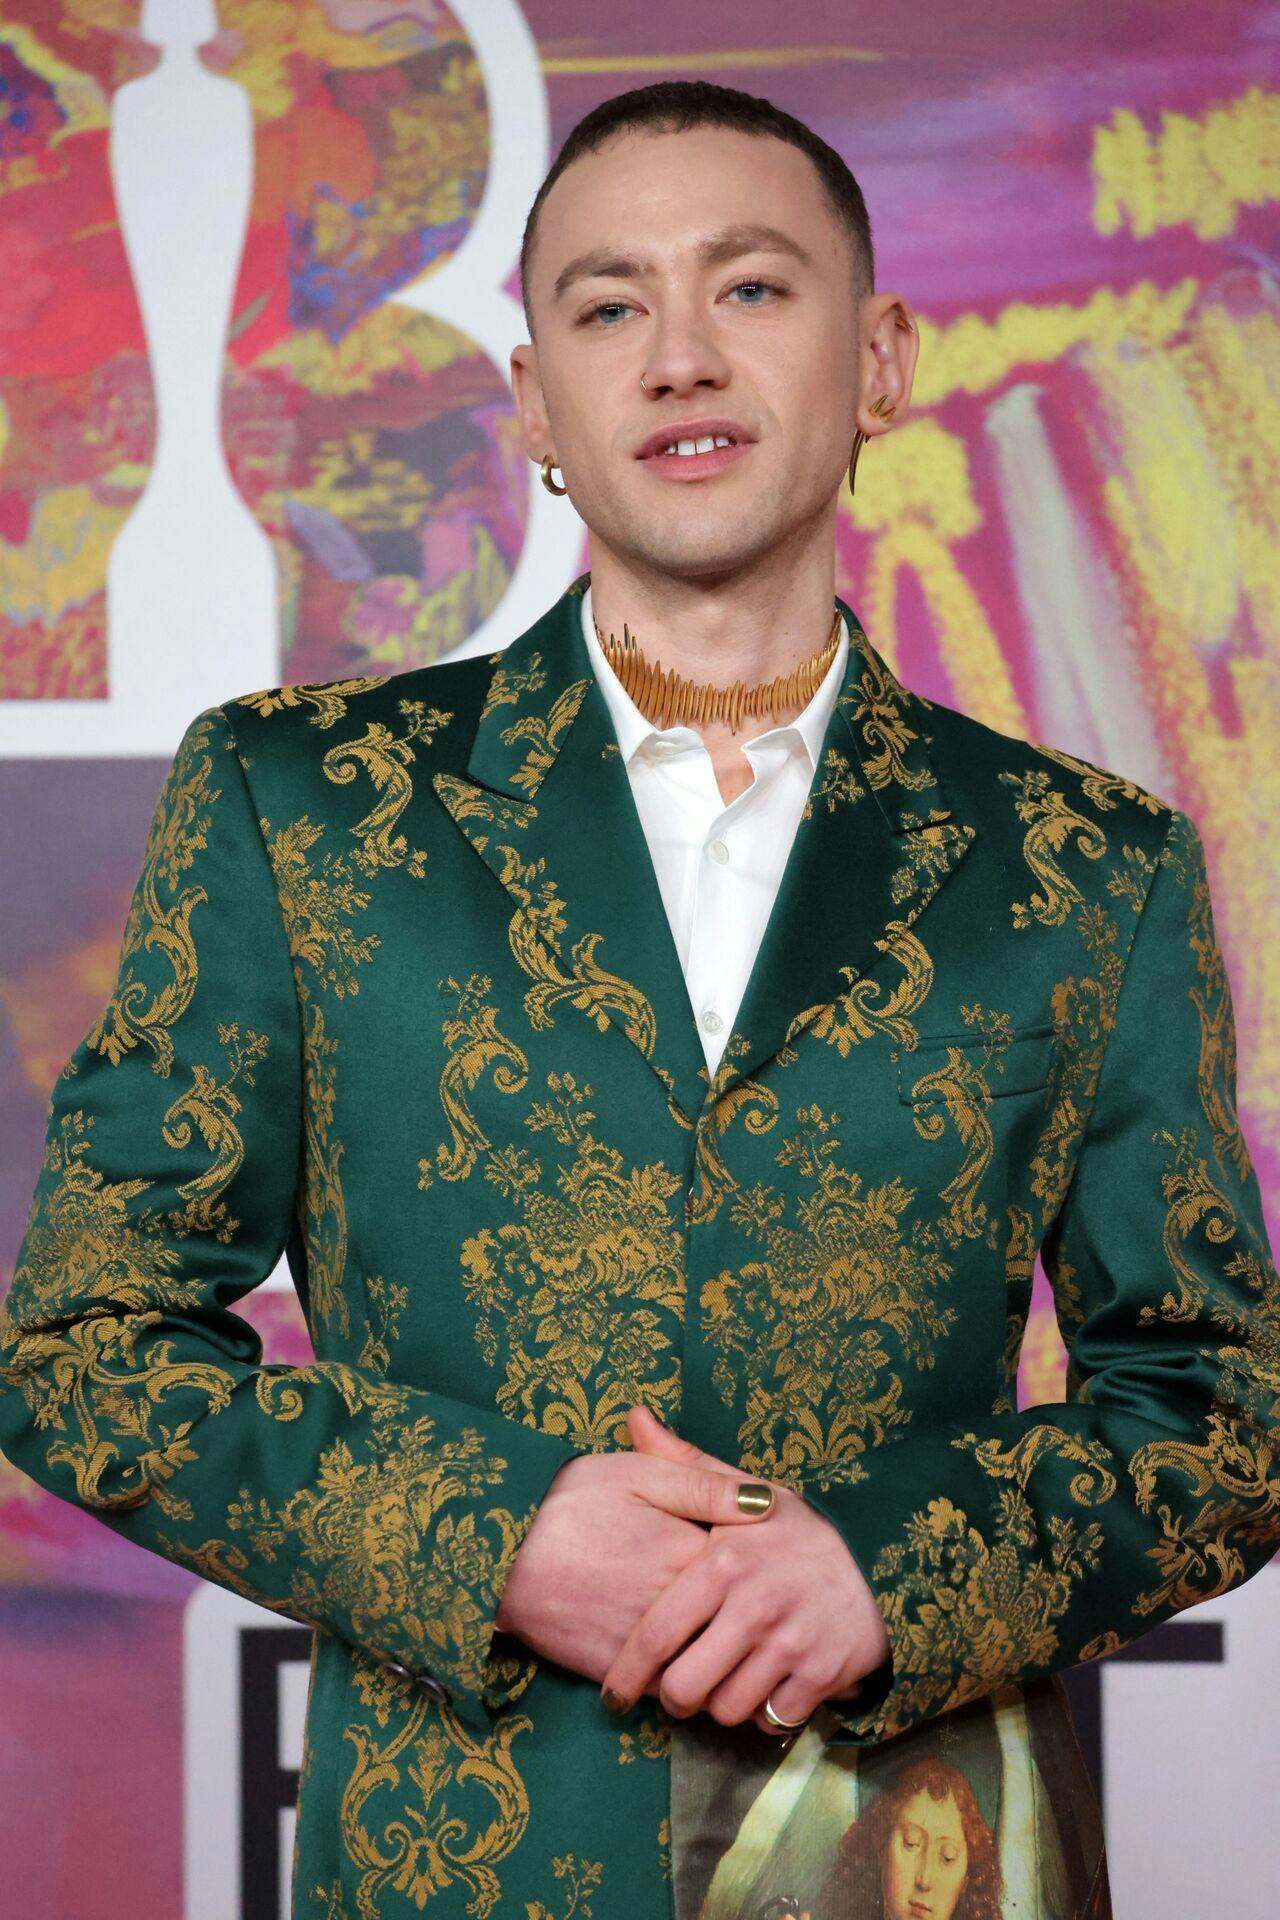 British singer Olly Alexander poses on the red carpet upon arrival for the BRIT Awards 2024 in London on March 2, 2024. (Photo by CARLOS JASSO / AFP) / RESTRICTED TO EDITORIAL USE - NO POSTERS - NO MERCHANDISE- NO USE IN PUBLICATIONS DEVOTED TO ARTISTS